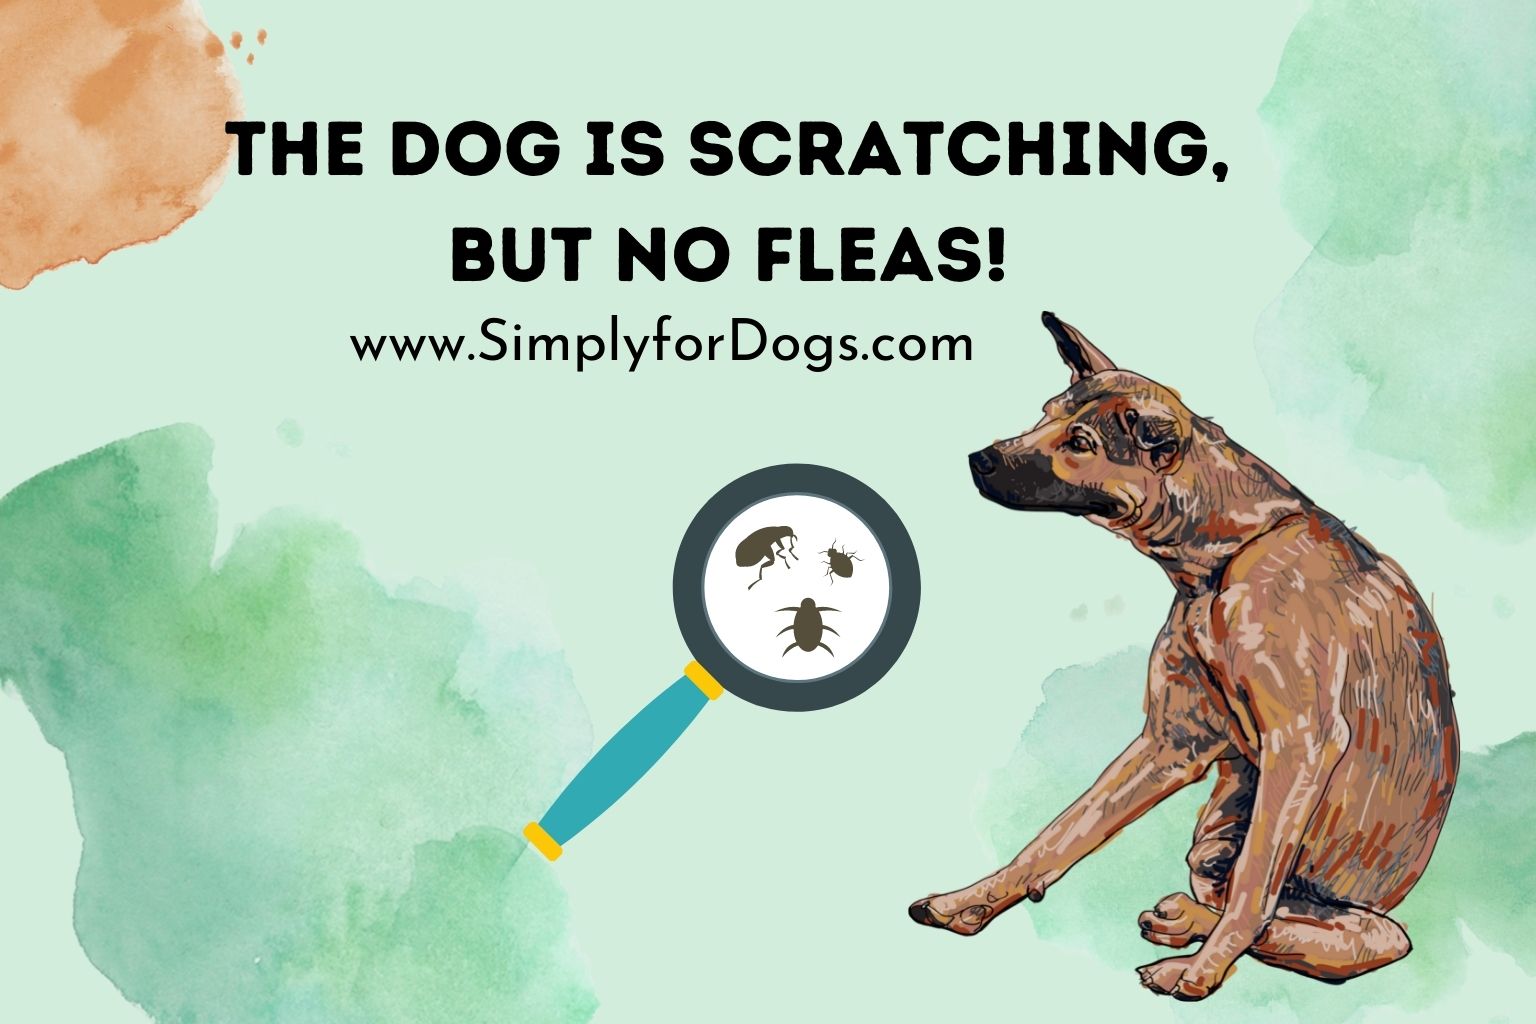 The Dog is Scratching, But No Fleas!